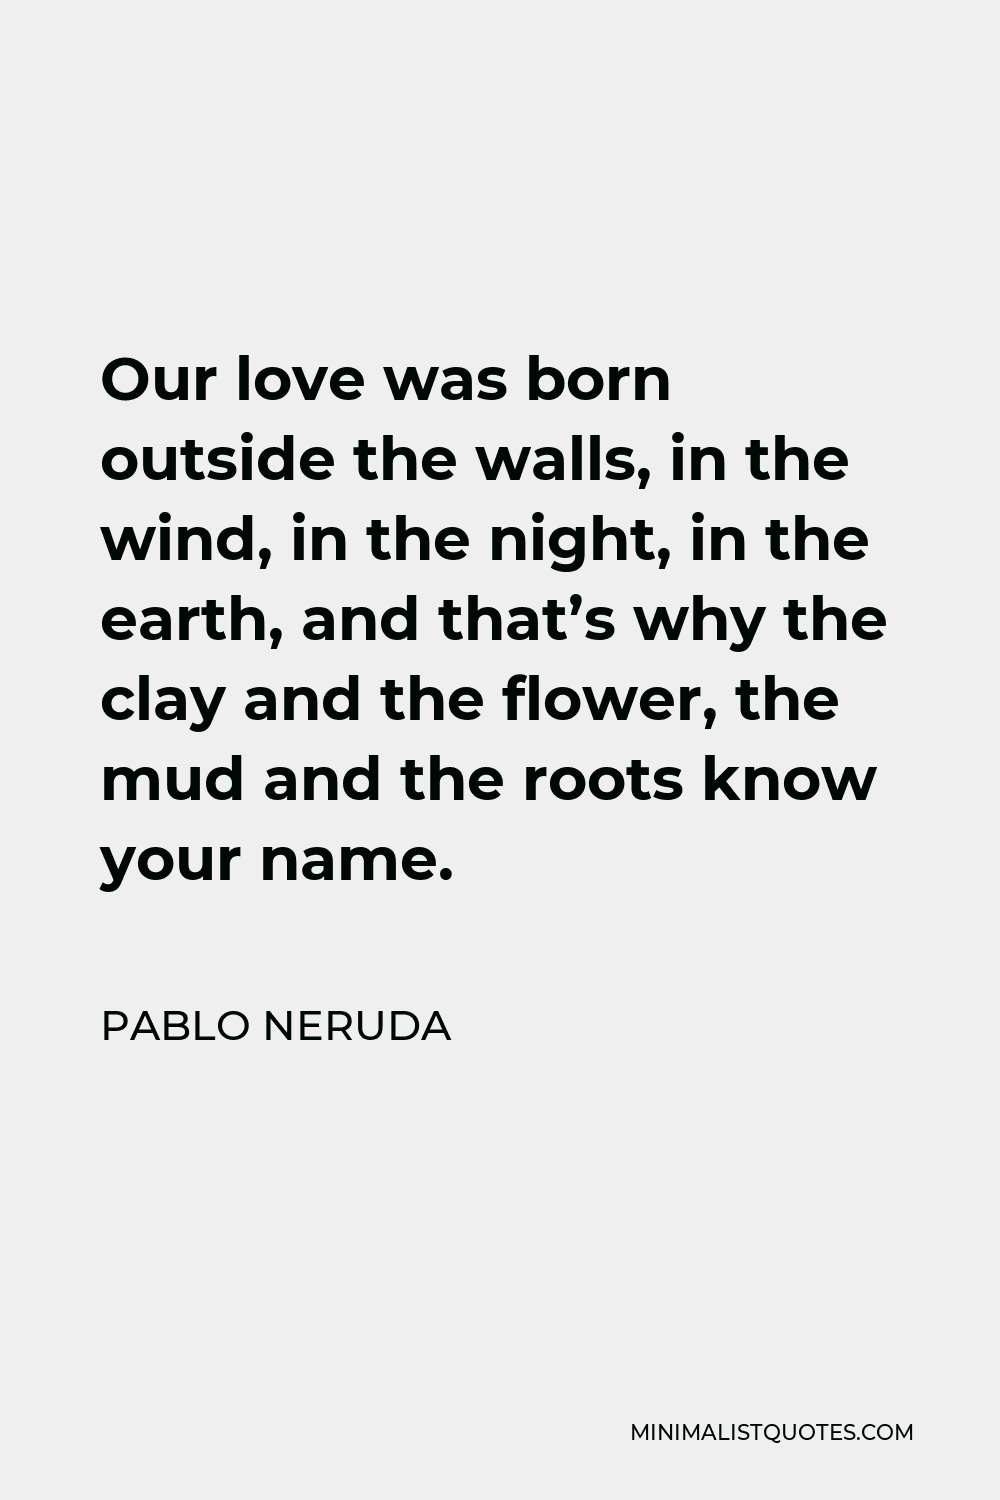 Pablo Neruda Quote - Our love was born outside the walls, in the wind, in the night, in the earth, and that’s why the clay and the flower, the mud and the roots know your name.